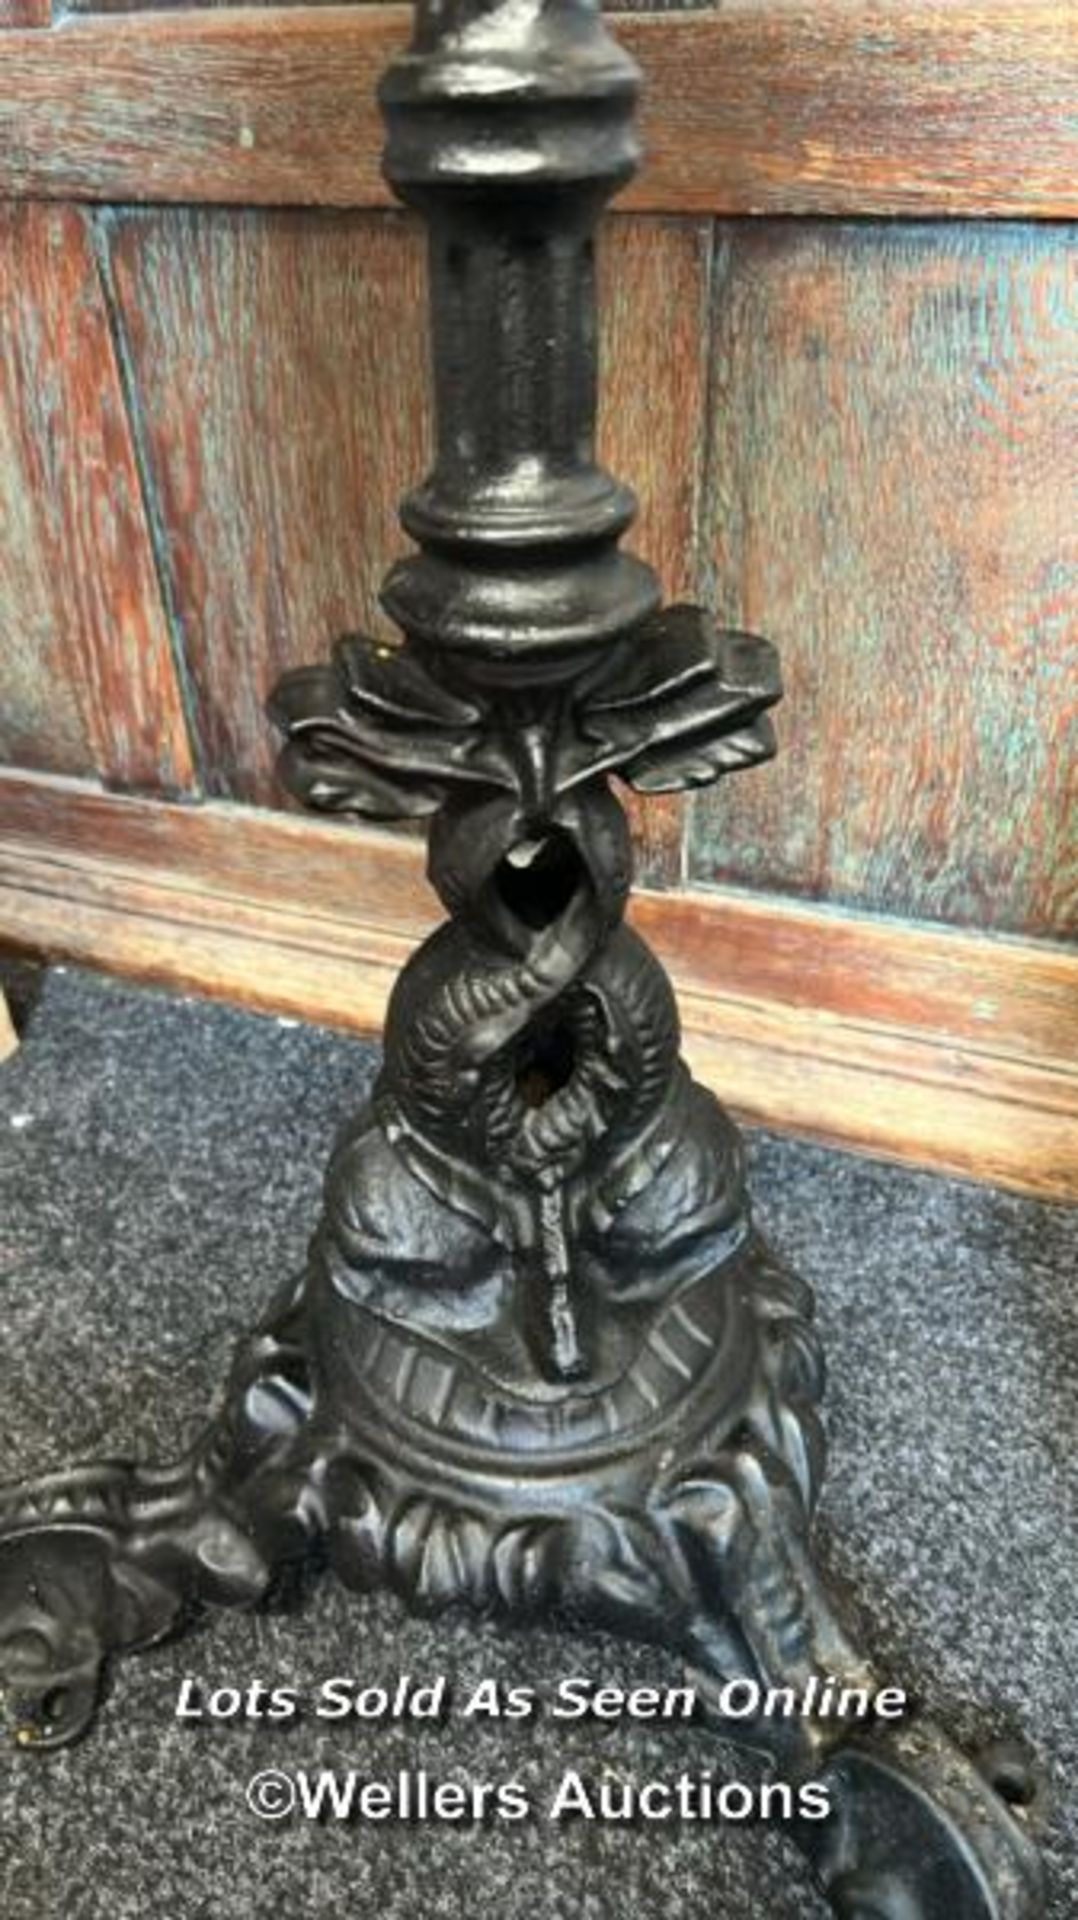 Decorative cast iron garden stand, 86.5cm high - Image 2 of 4